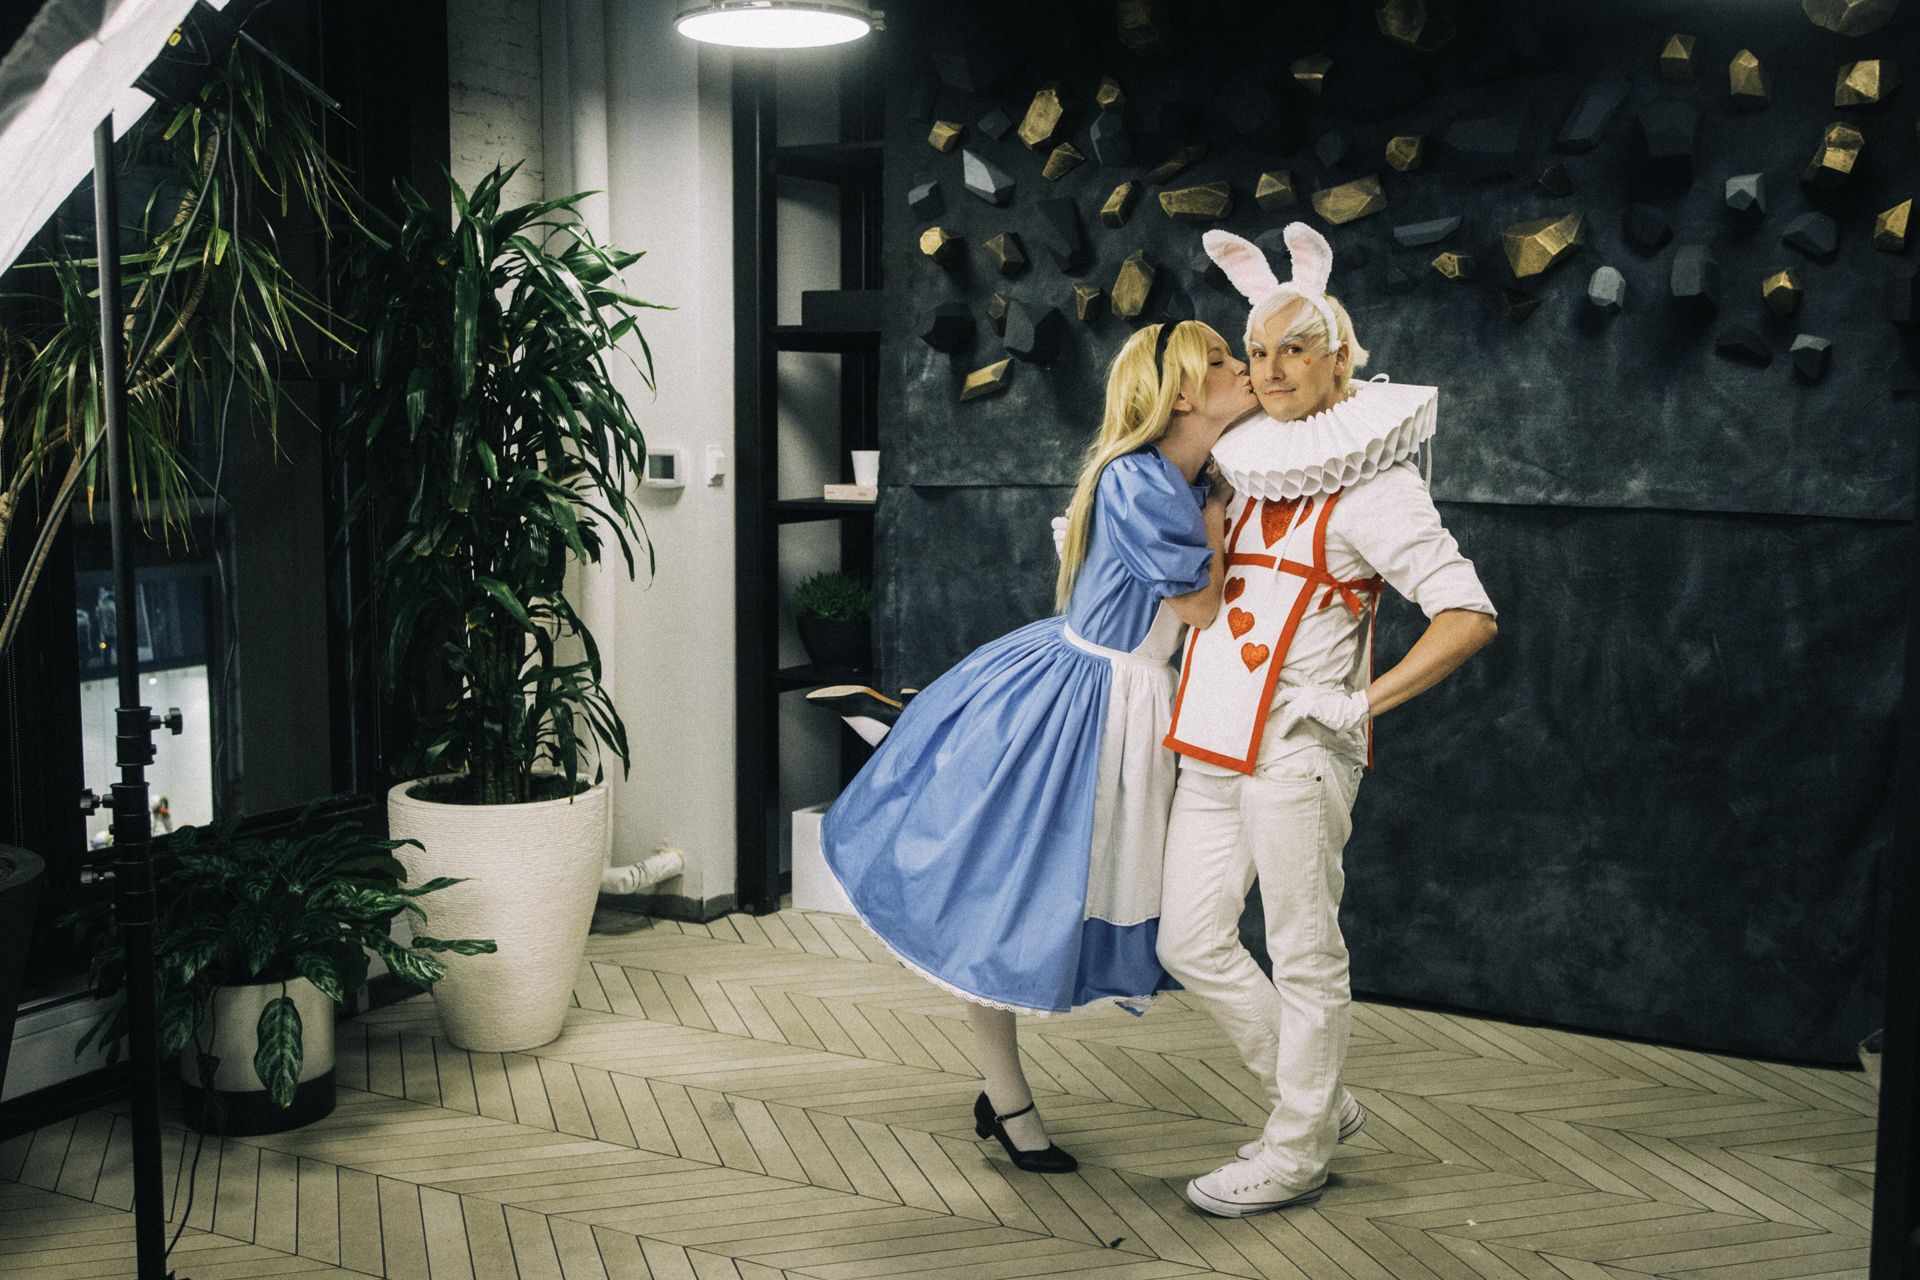 The Best Photos From Kotaku’s Cosplay Party